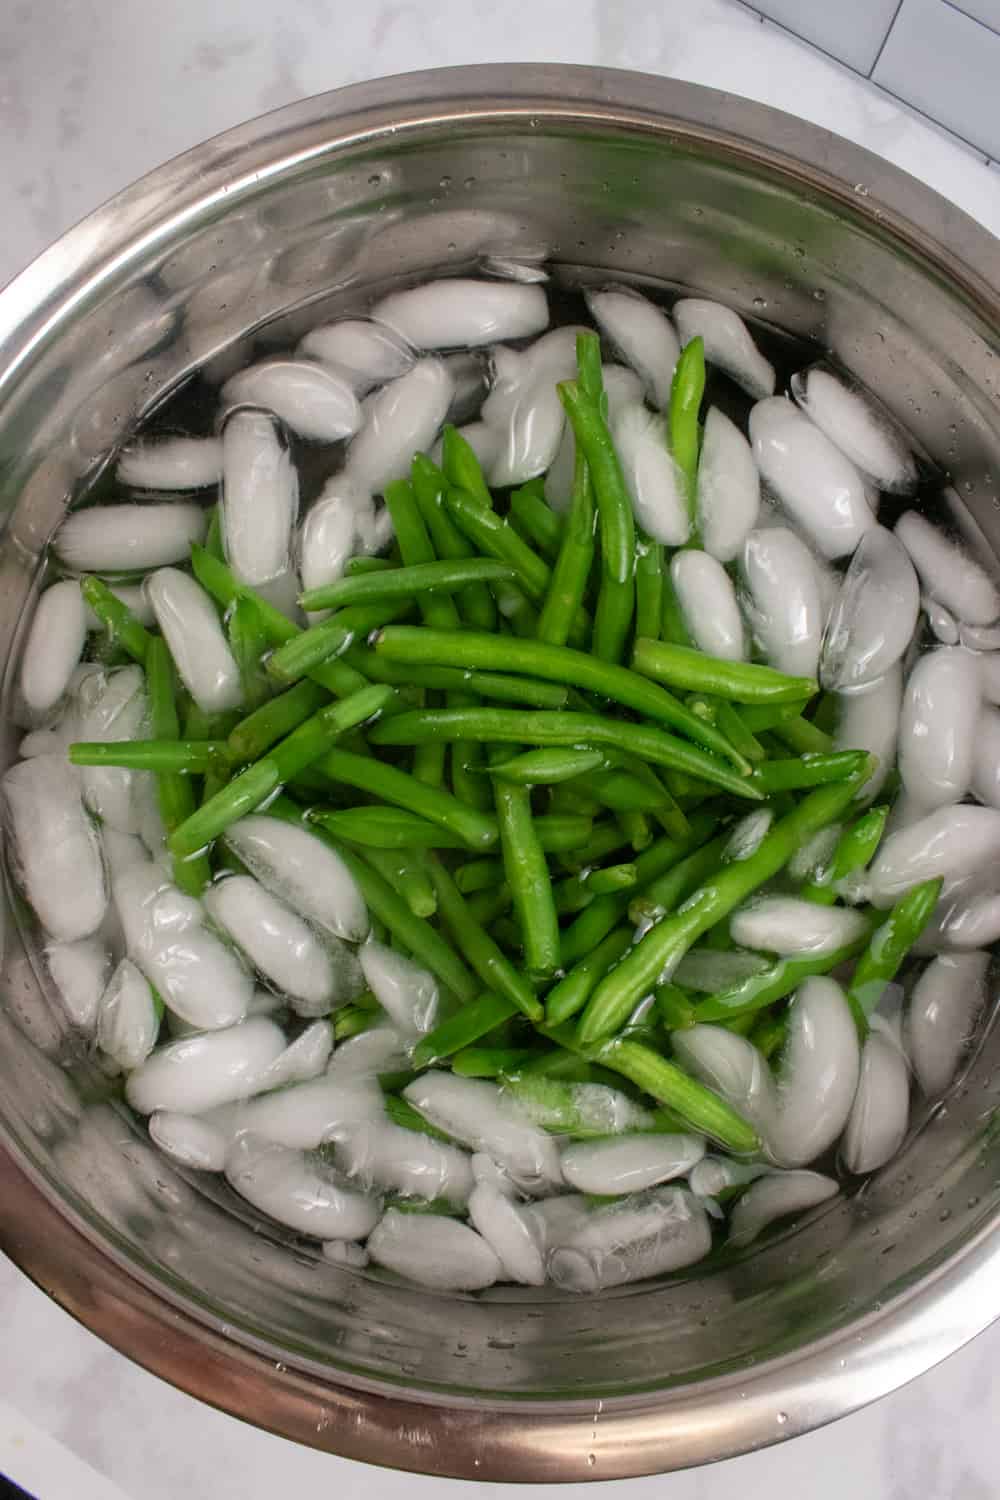 cooling the blanched green beans in ice water